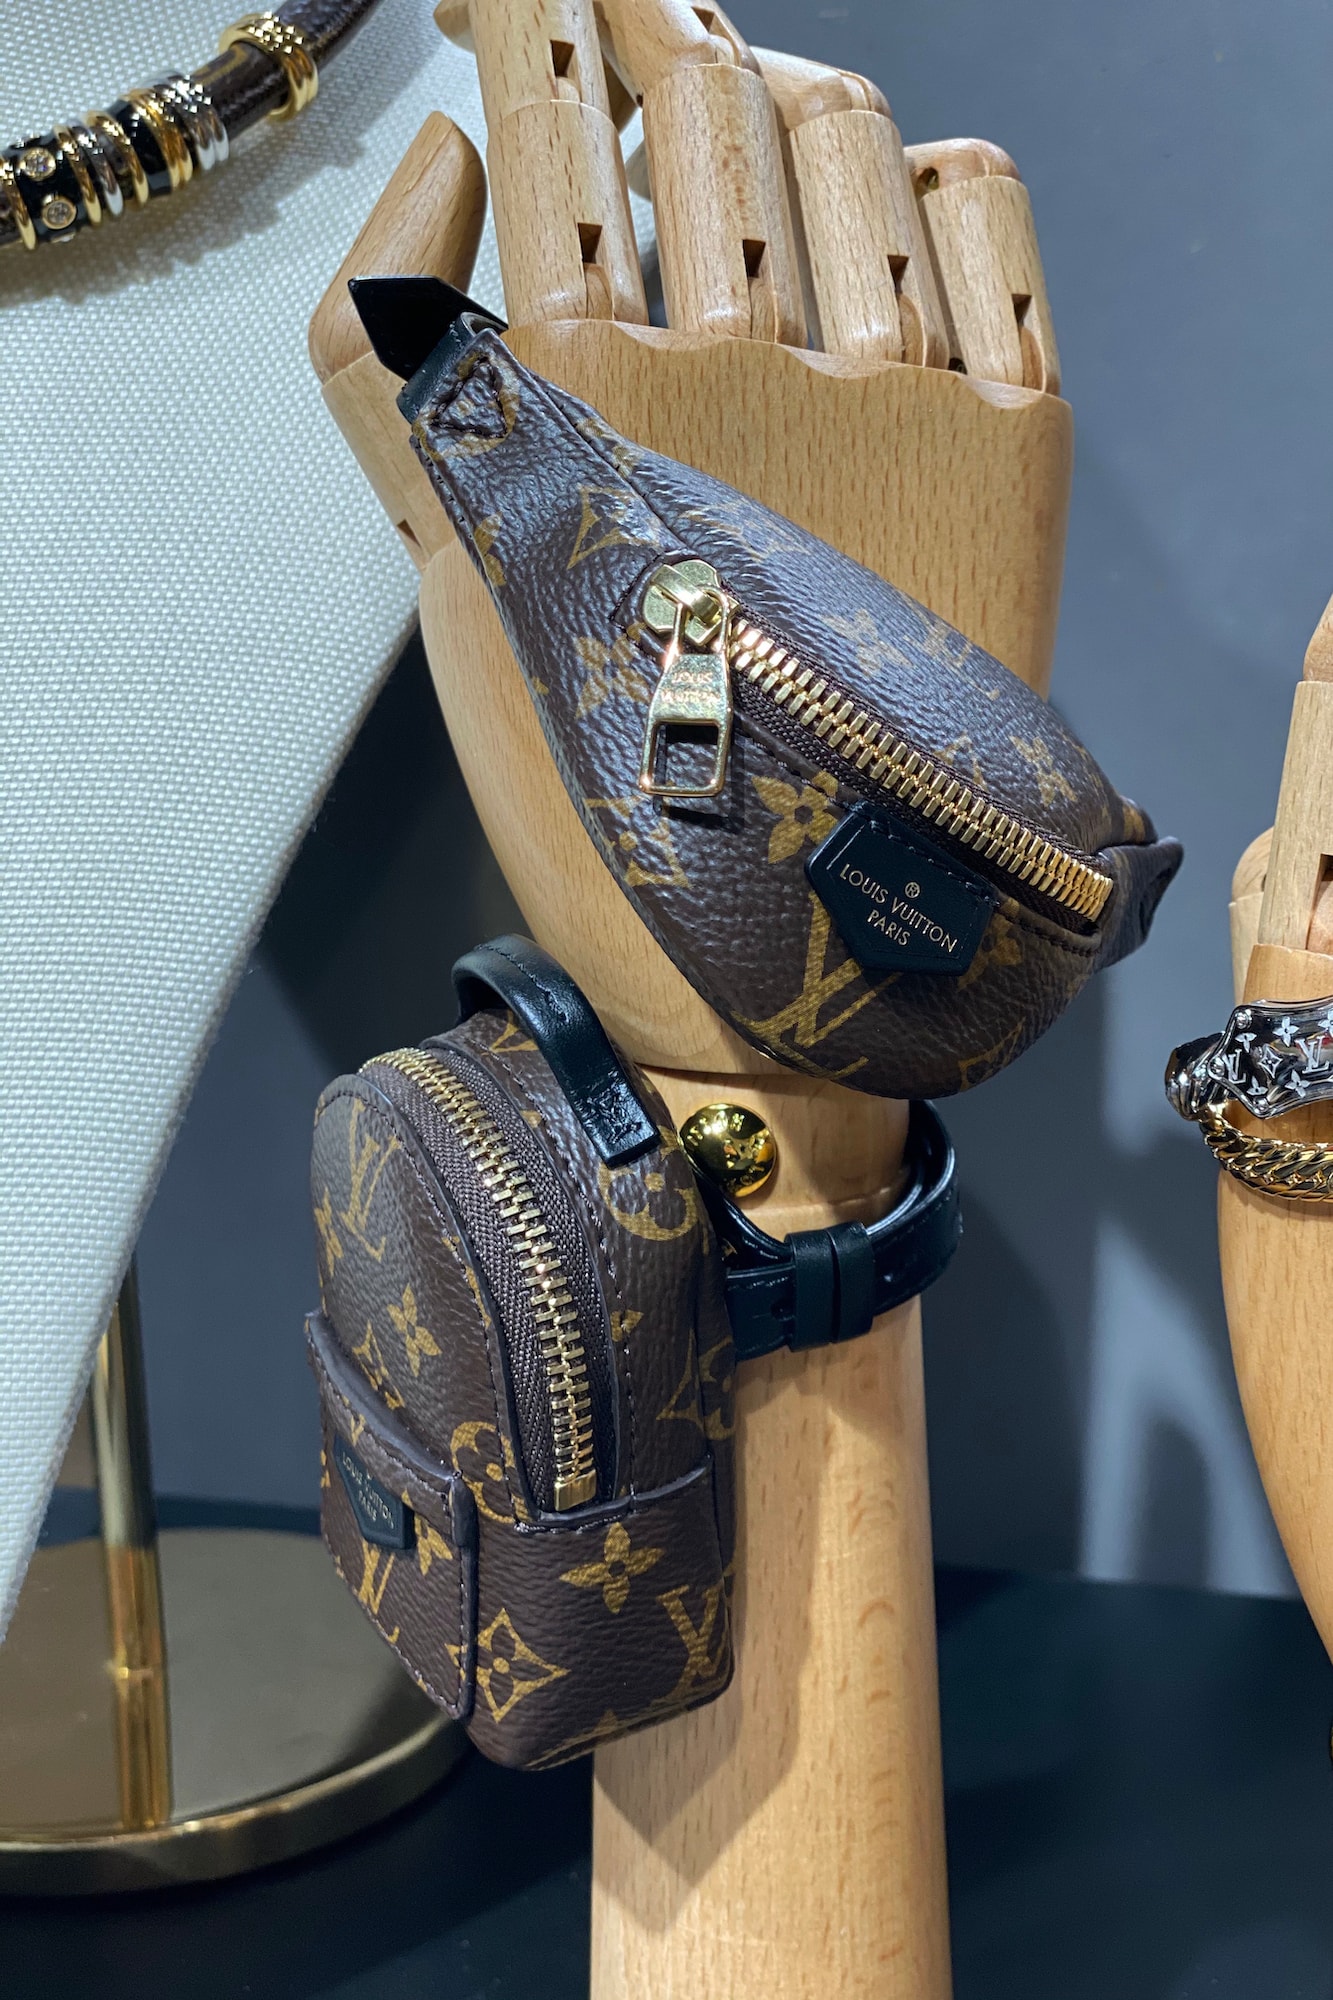 Louis Vuitton Tiny Monogram Bag Preview SS20 Accessory Nicholas Ghesquiere Design Backpack Bum Bag Brown Pattern Leather